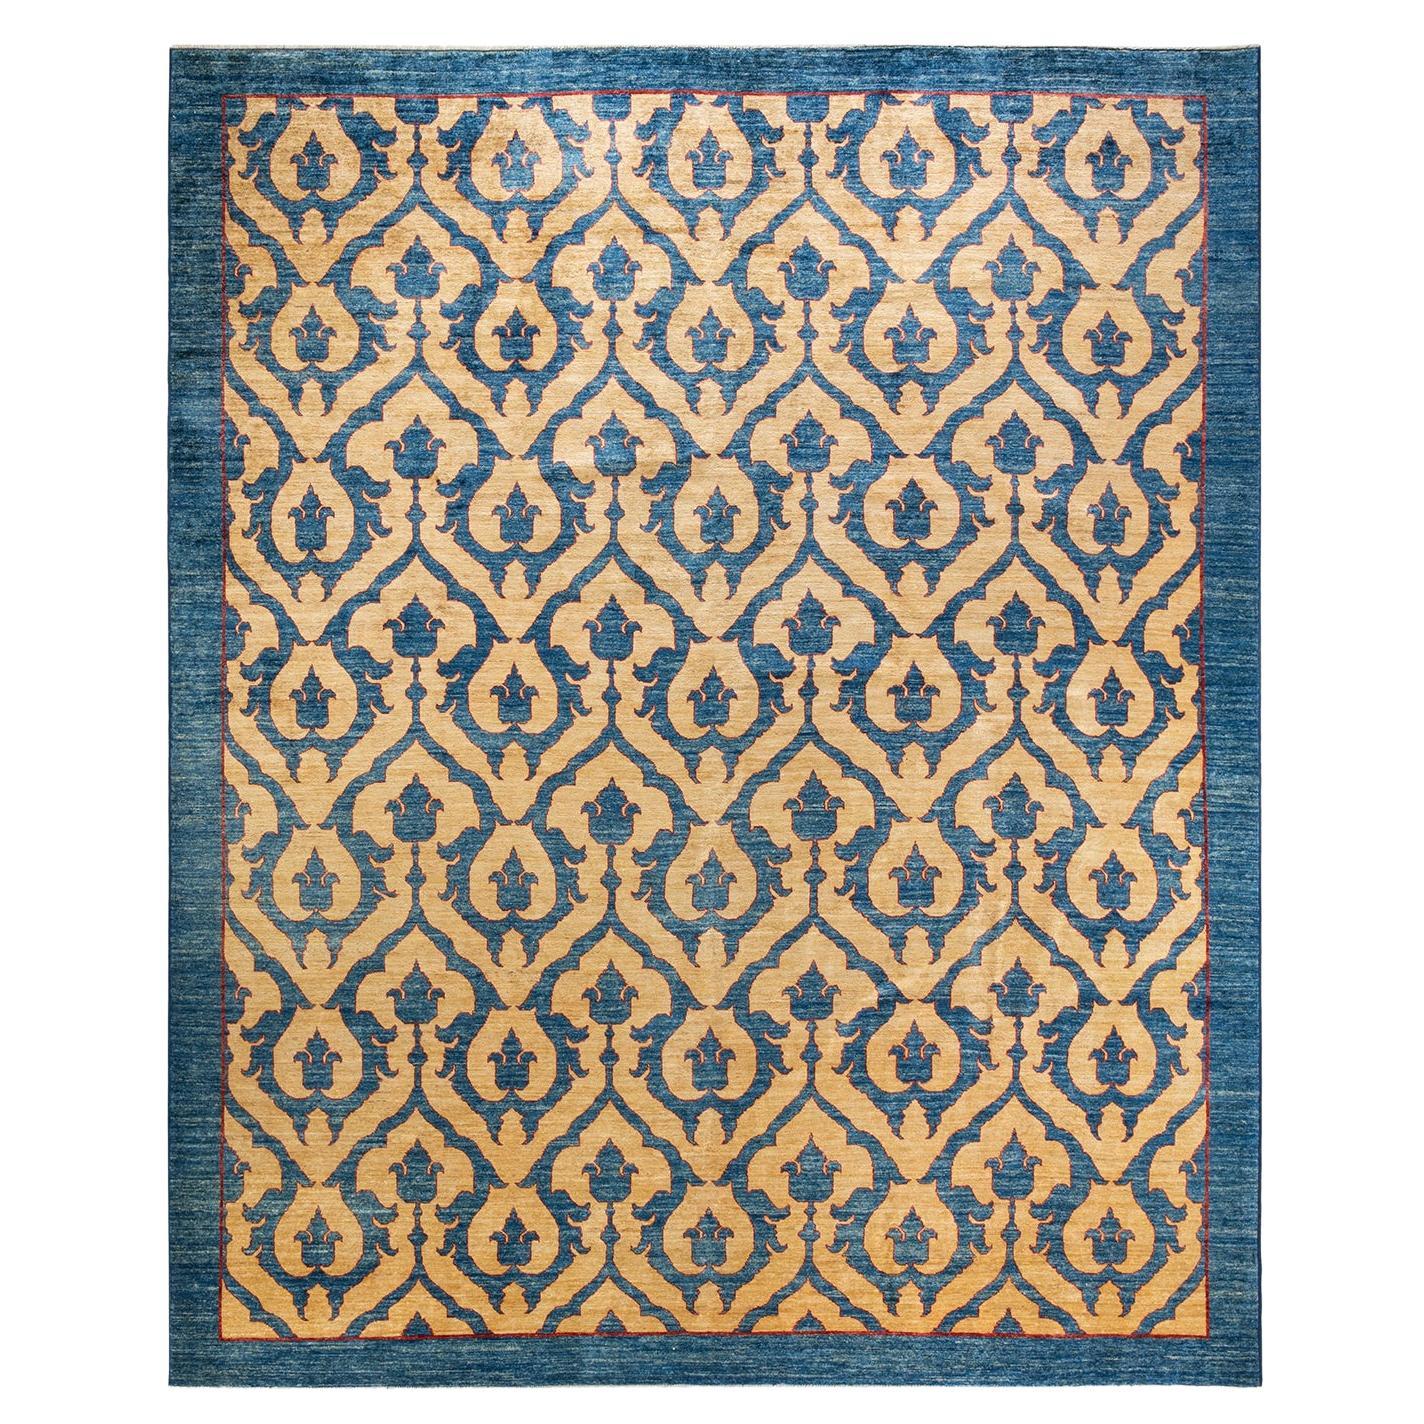 Contemporary Eclectic Hand Knotted Wool Blue Area Rug